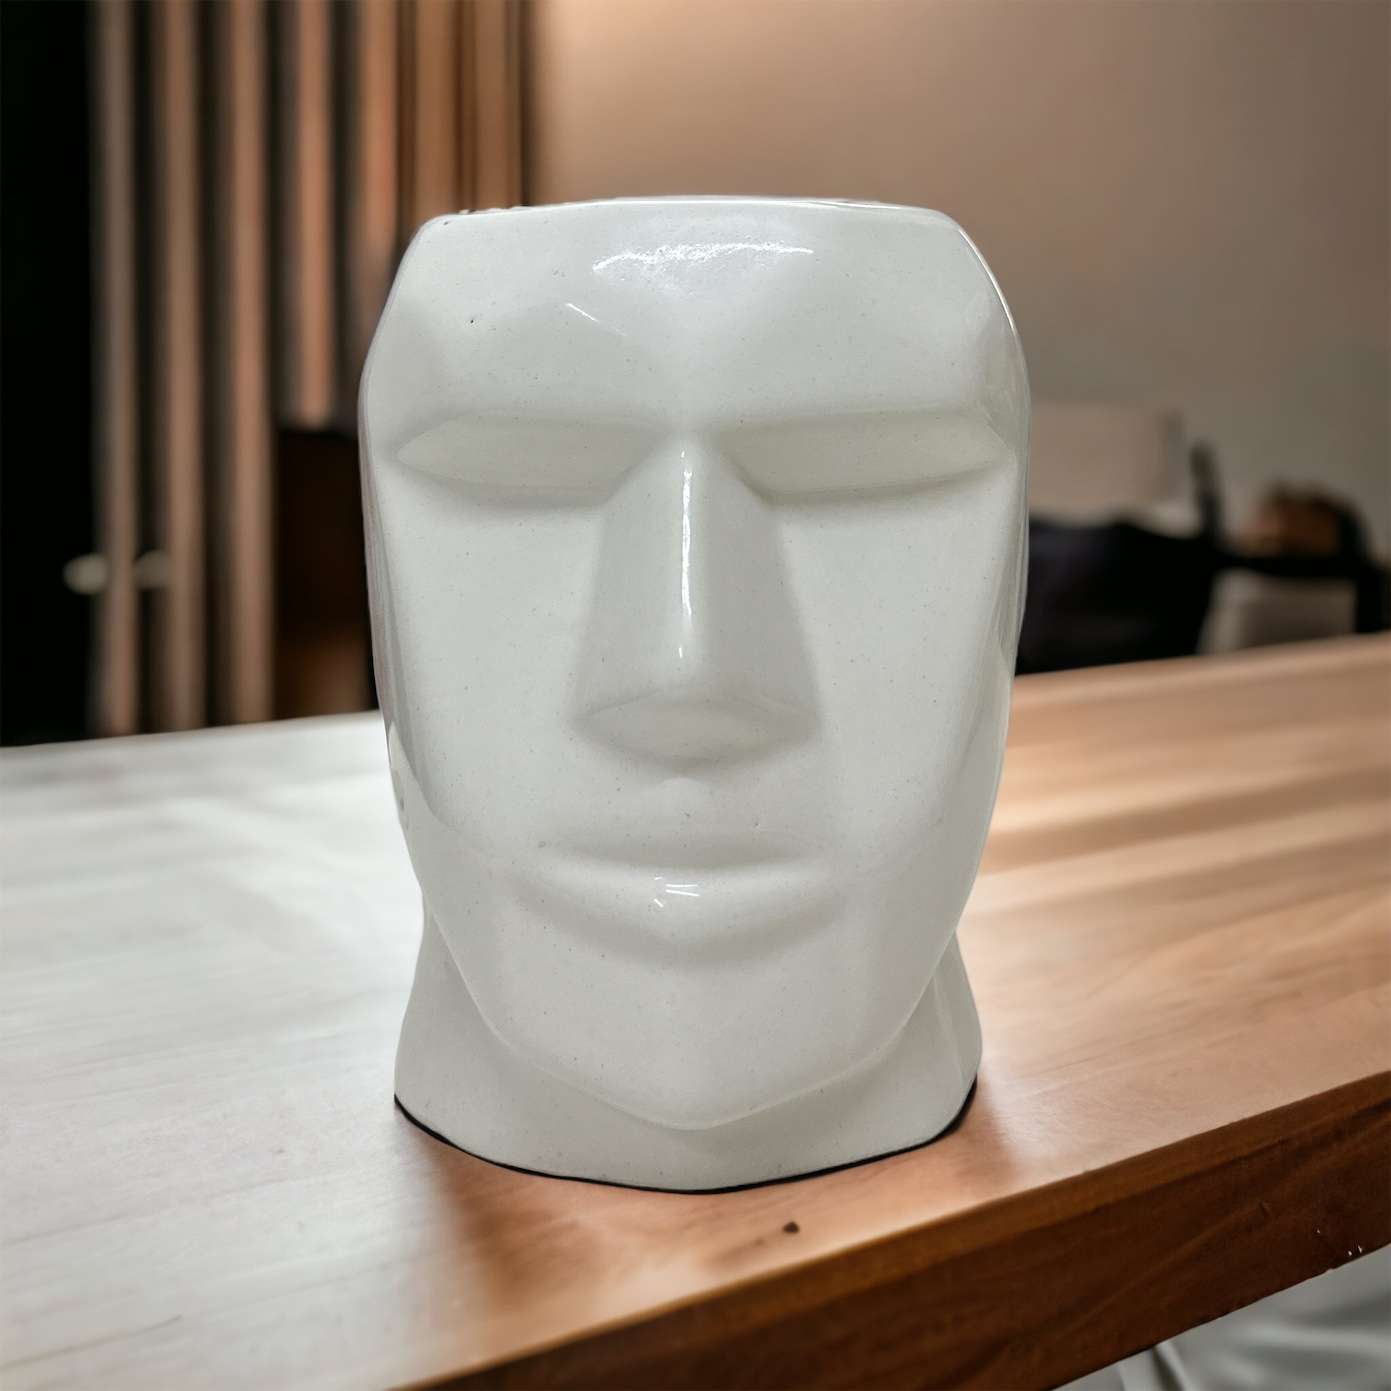 abstract face vase